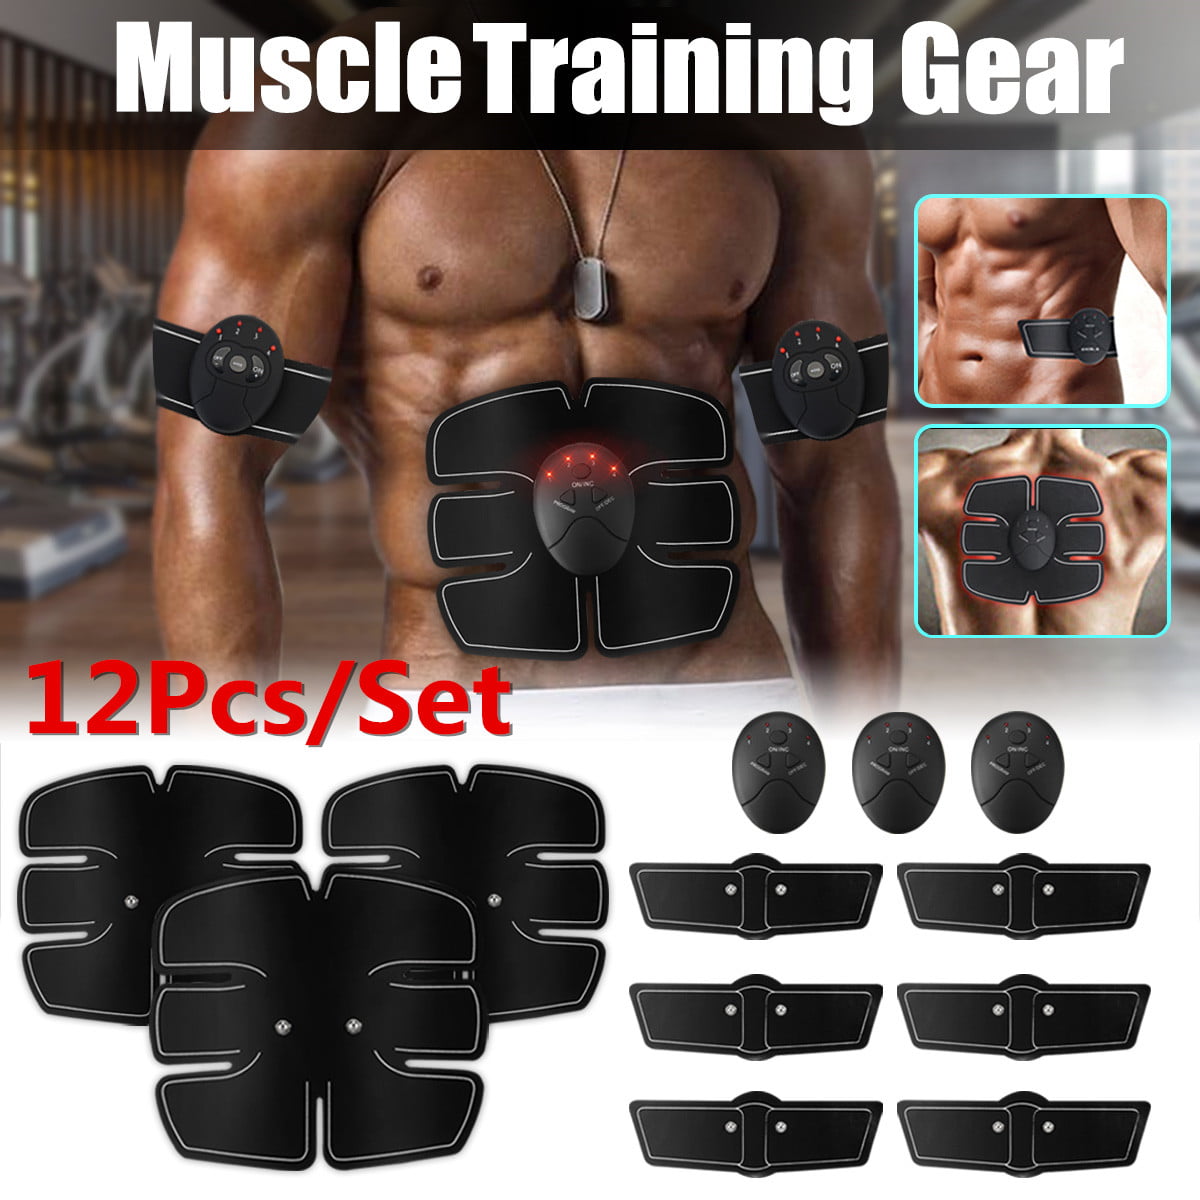 EMS Abdominal ABS Fit Muscle Training Gear Body Home Exercise Shape Fitness Set